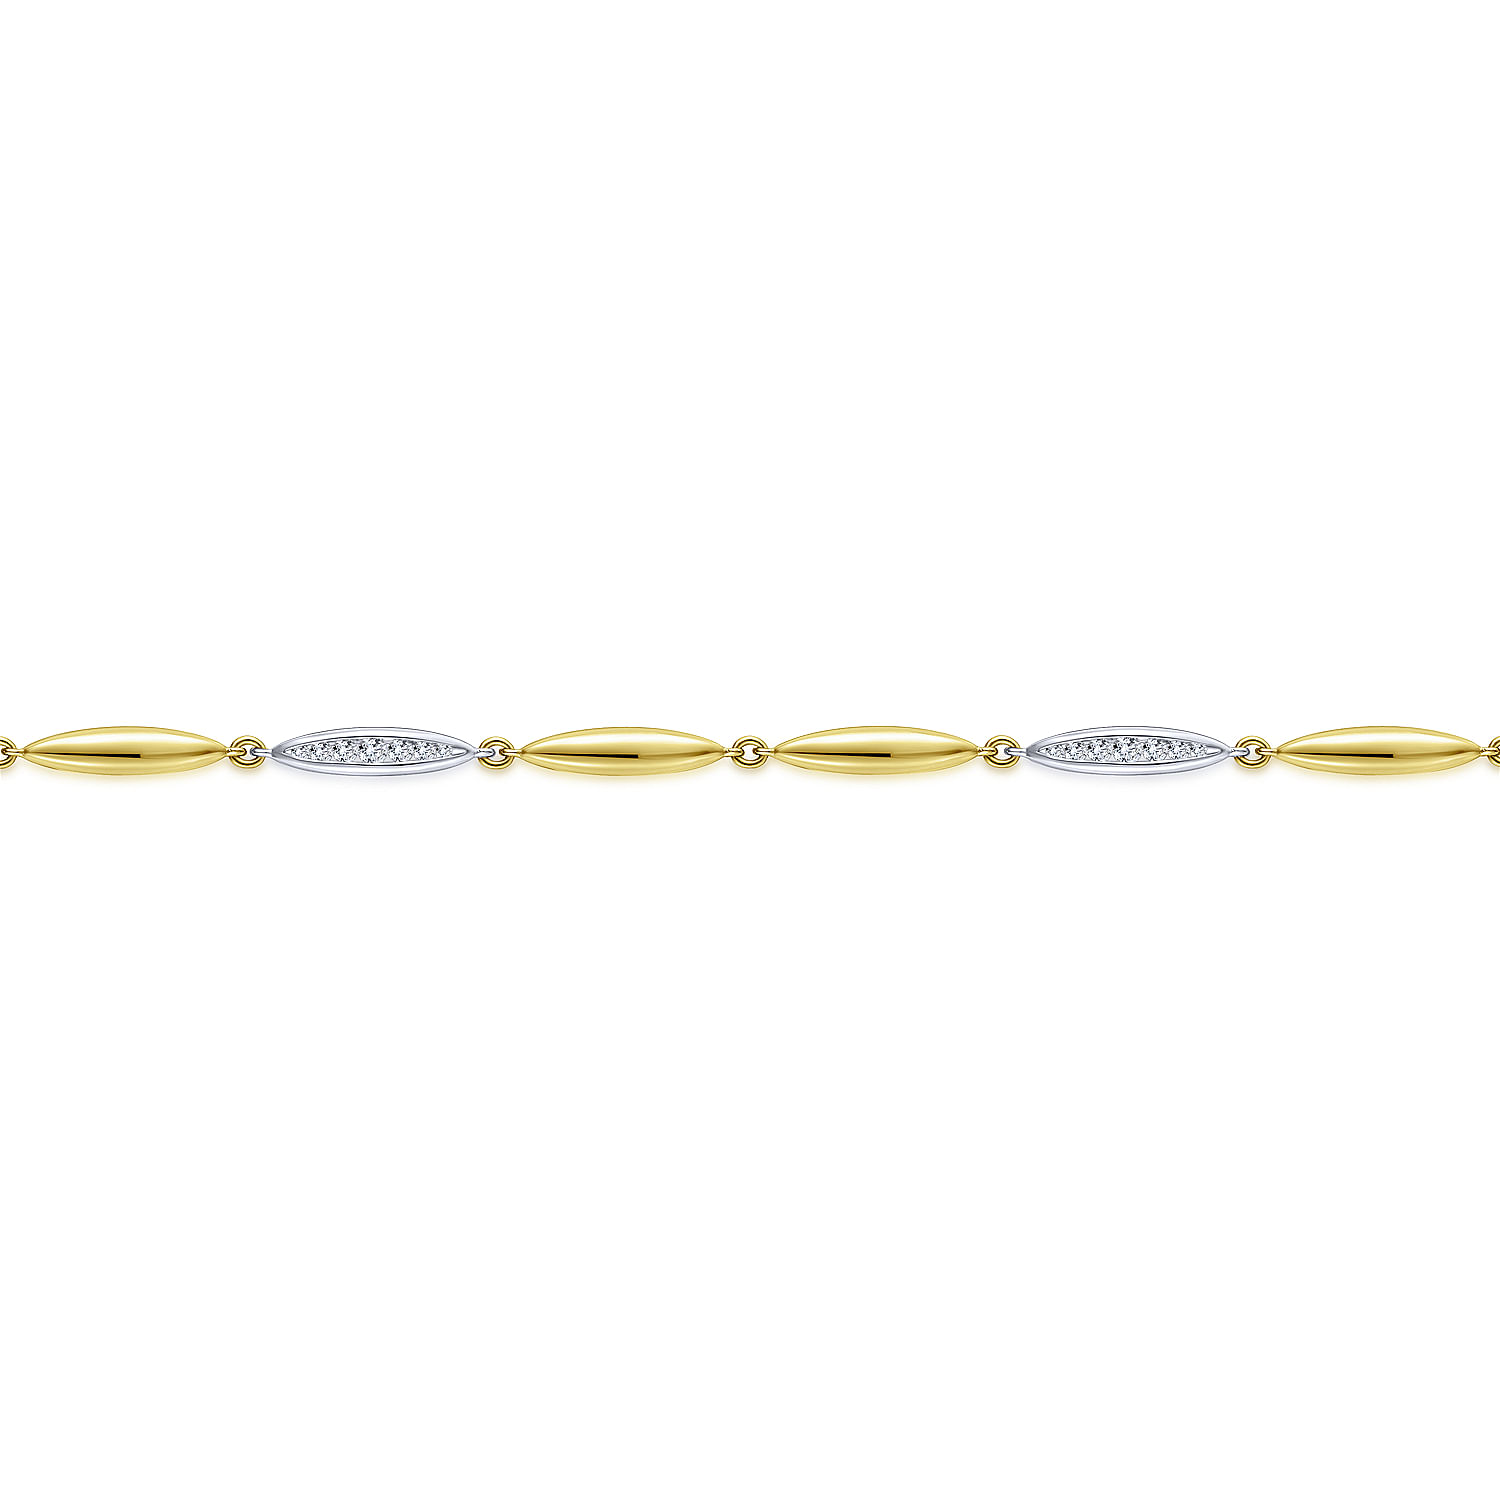 14K Yellow and White Gold Bracelet with Marquise Shapes and Diamonds